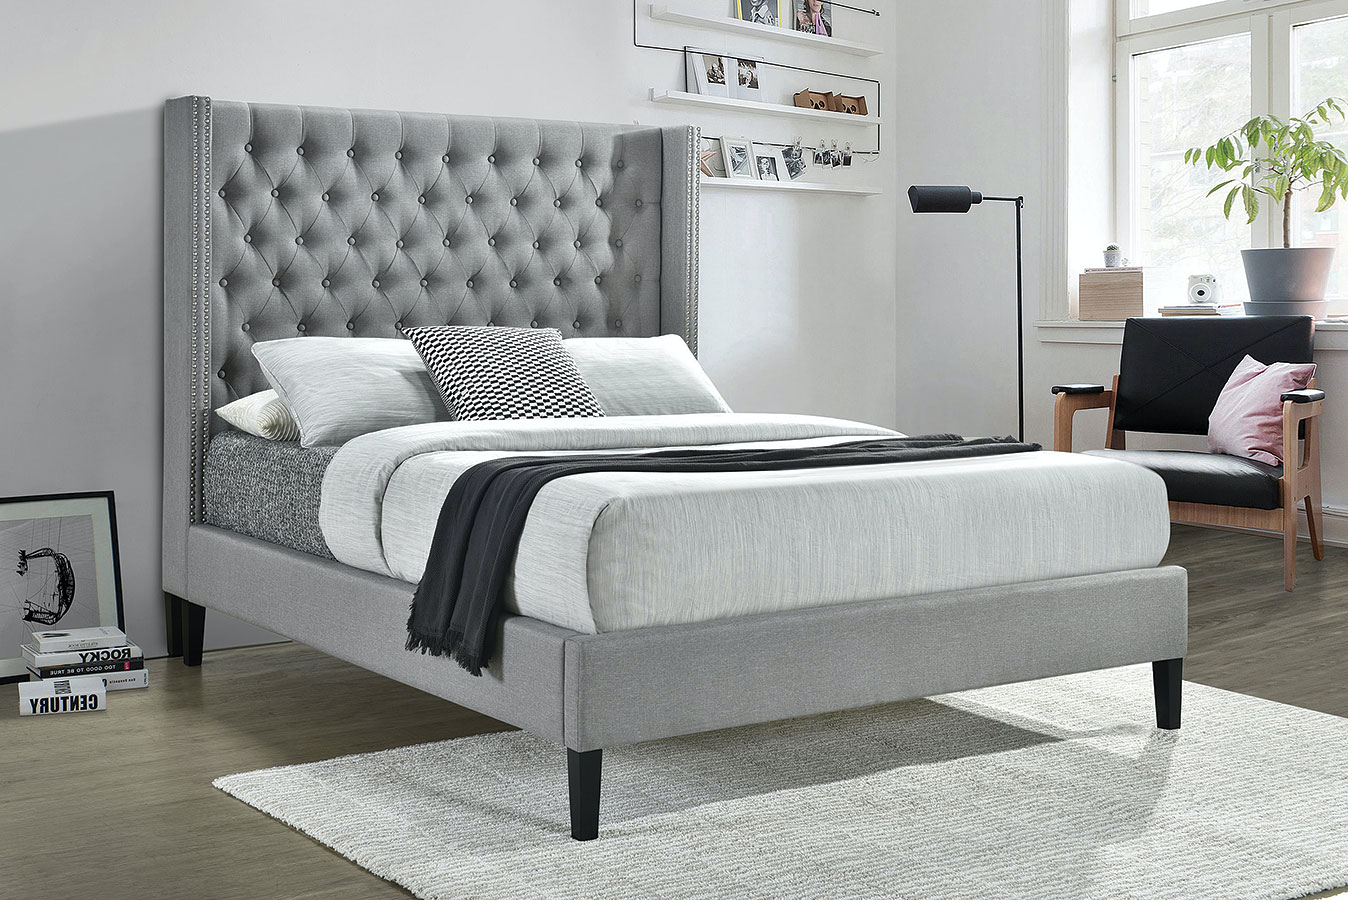 grey upholstered bed with studs